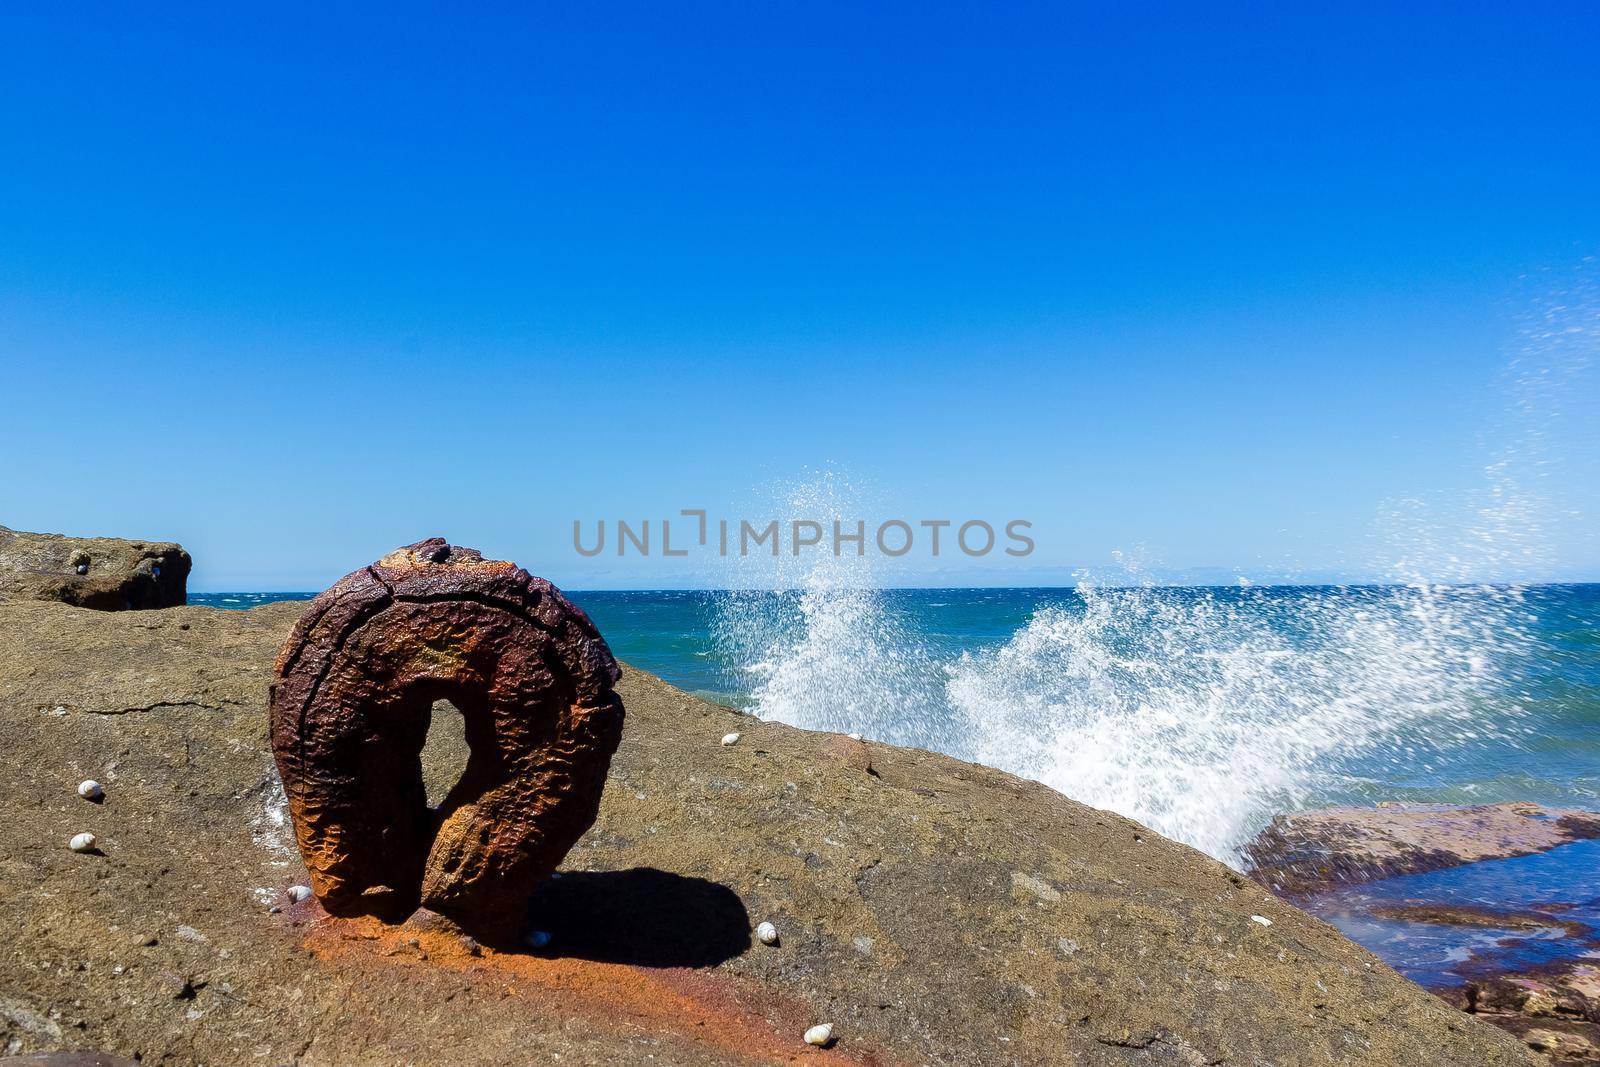 an old rusty round hook from the historic Sea Clliff Bridge with waves in the background, along the Grand Pacific Drive, Australia